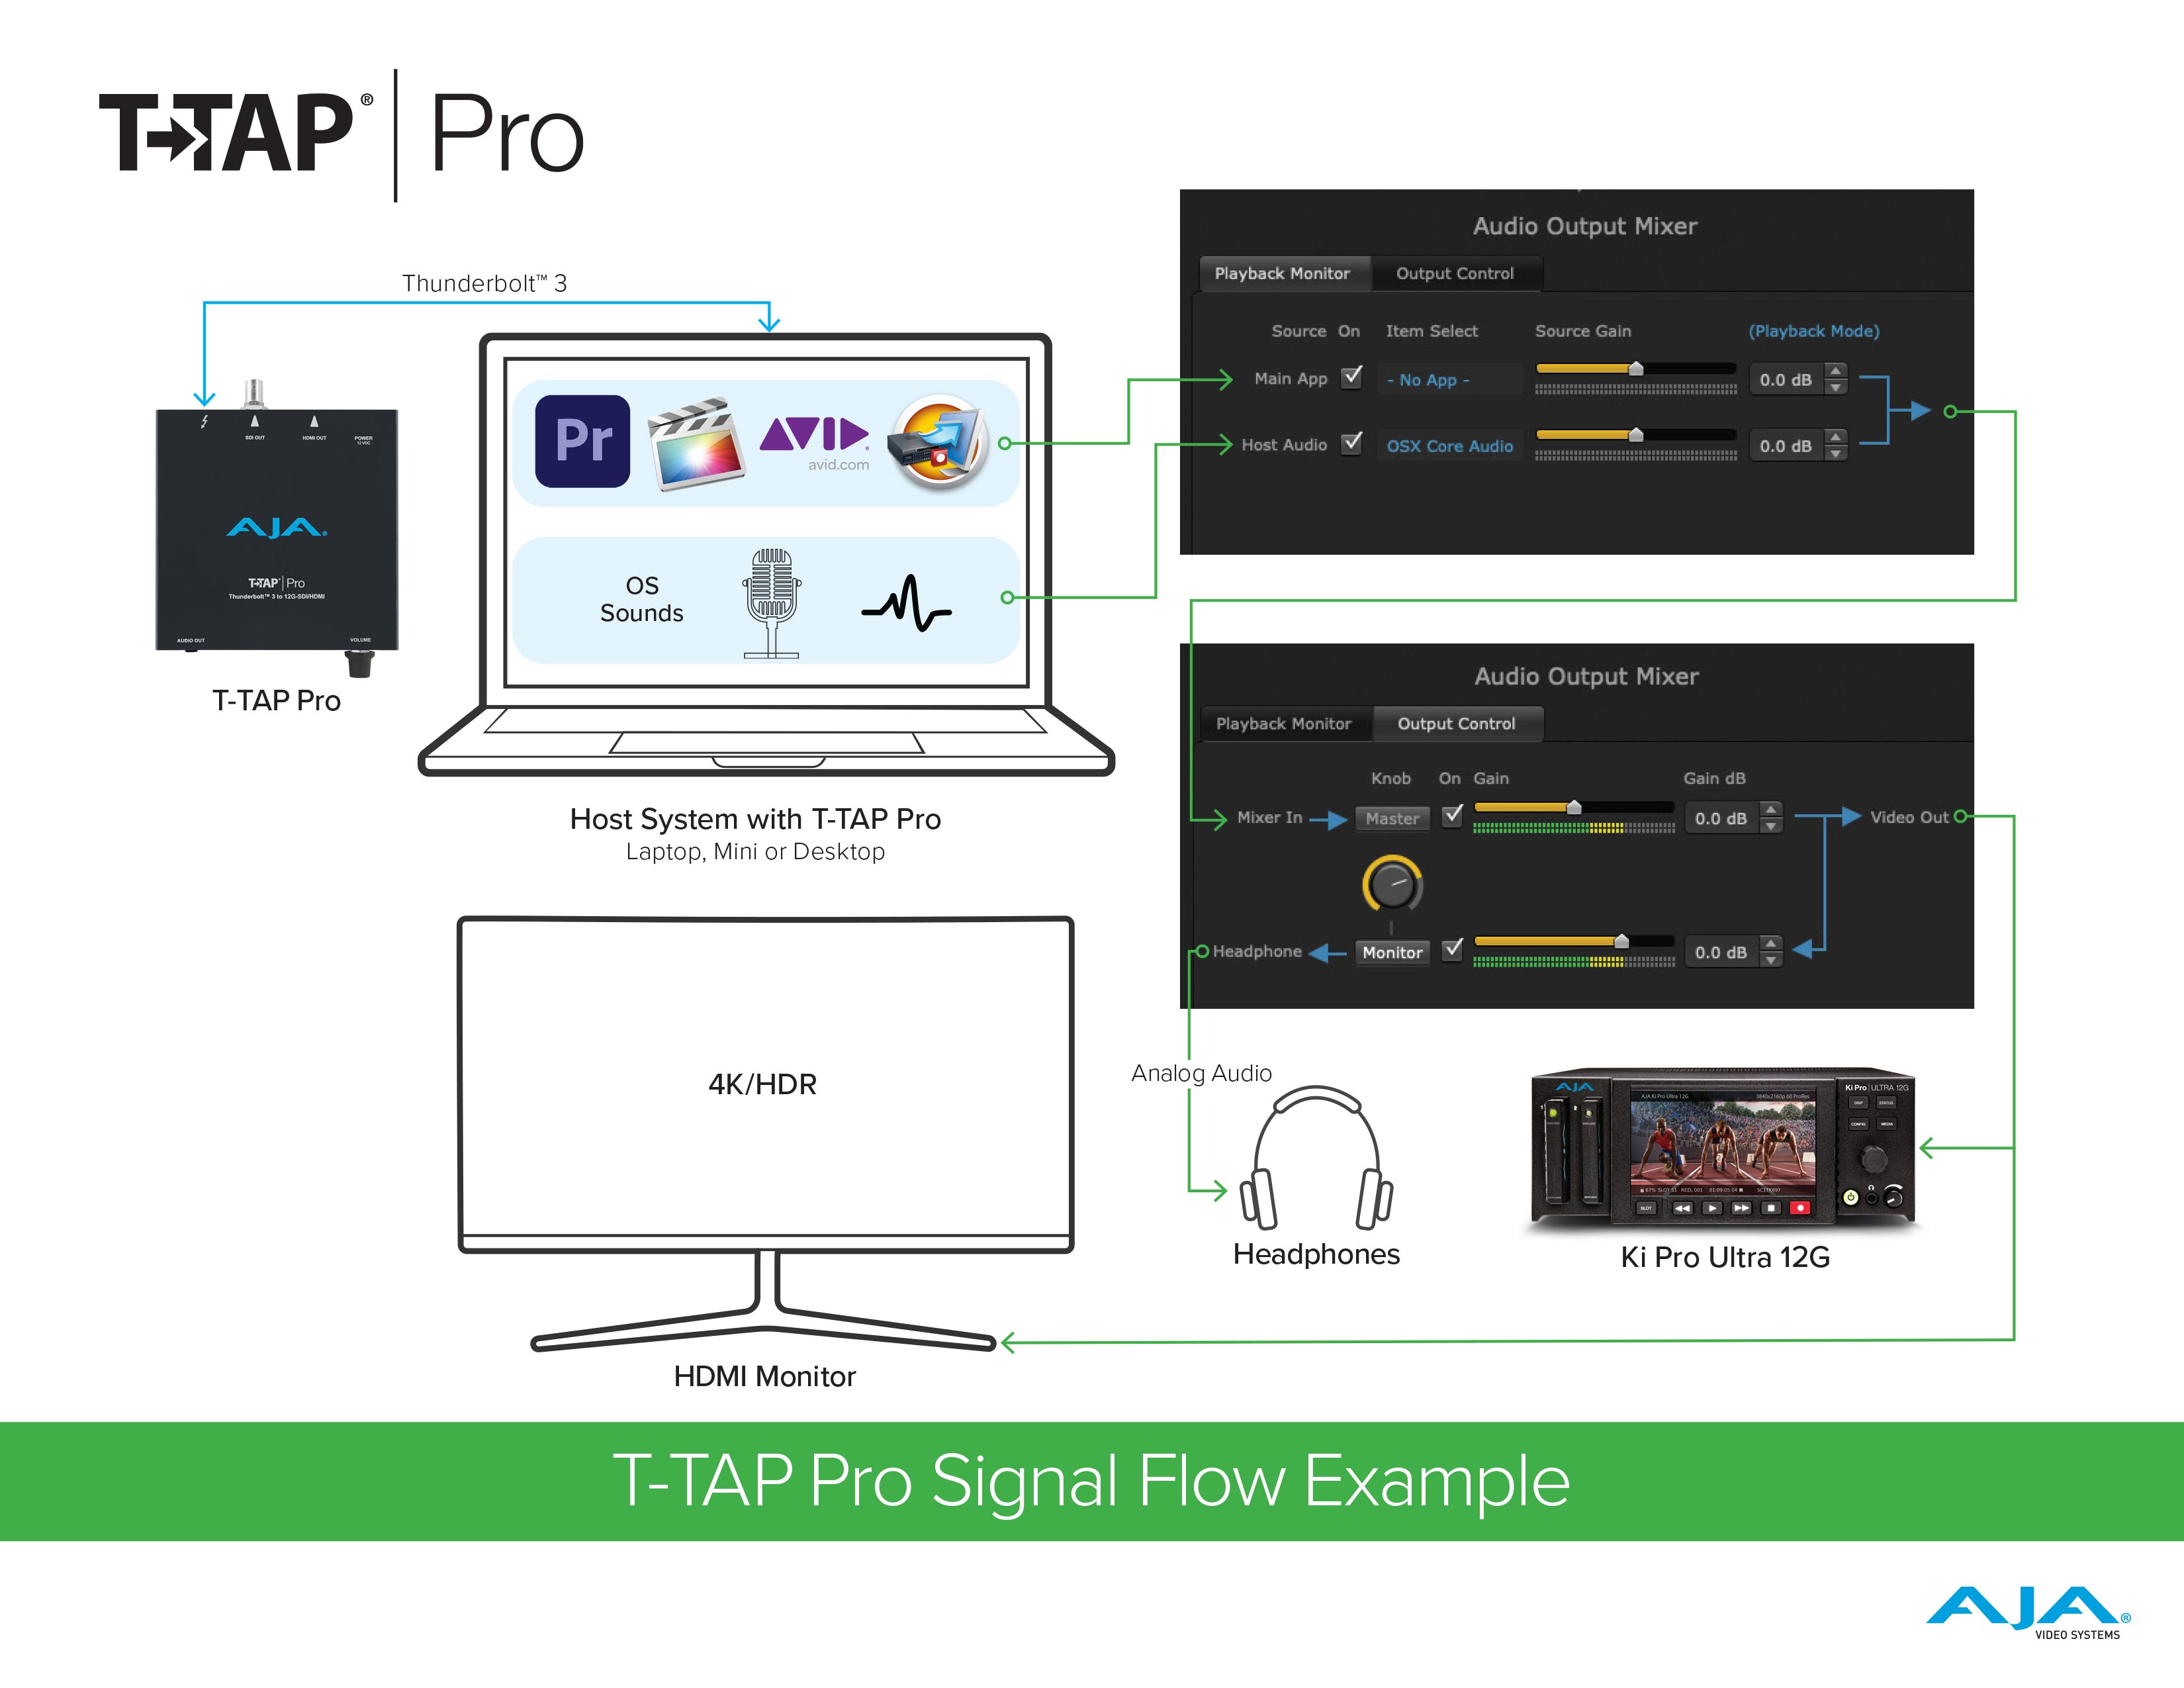 AJA T-TAP Pro: a portable Thunderbolt 3 device for video monitoring